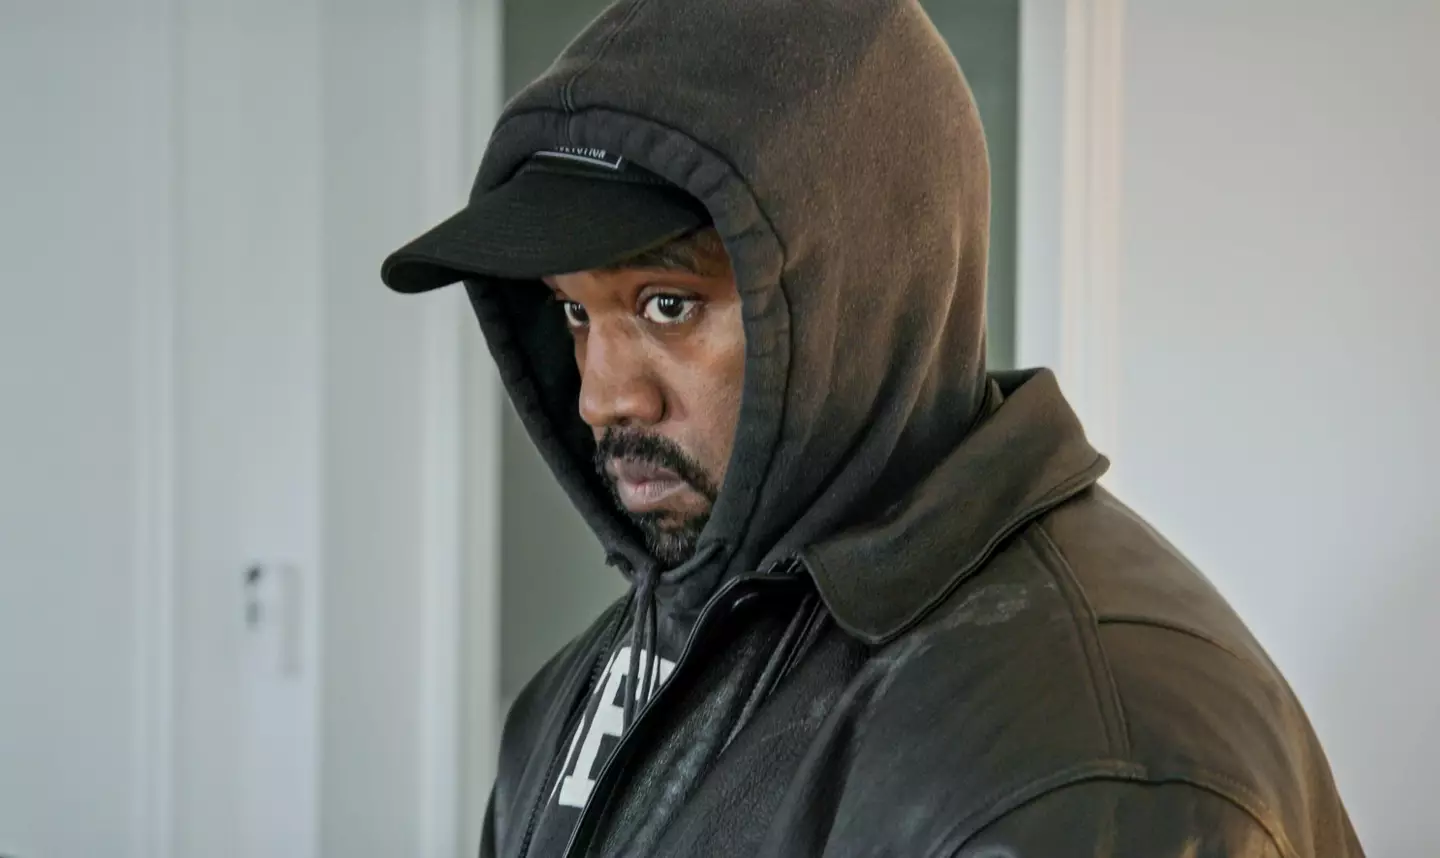 Adidas is under pressure to cut ties with Ye.